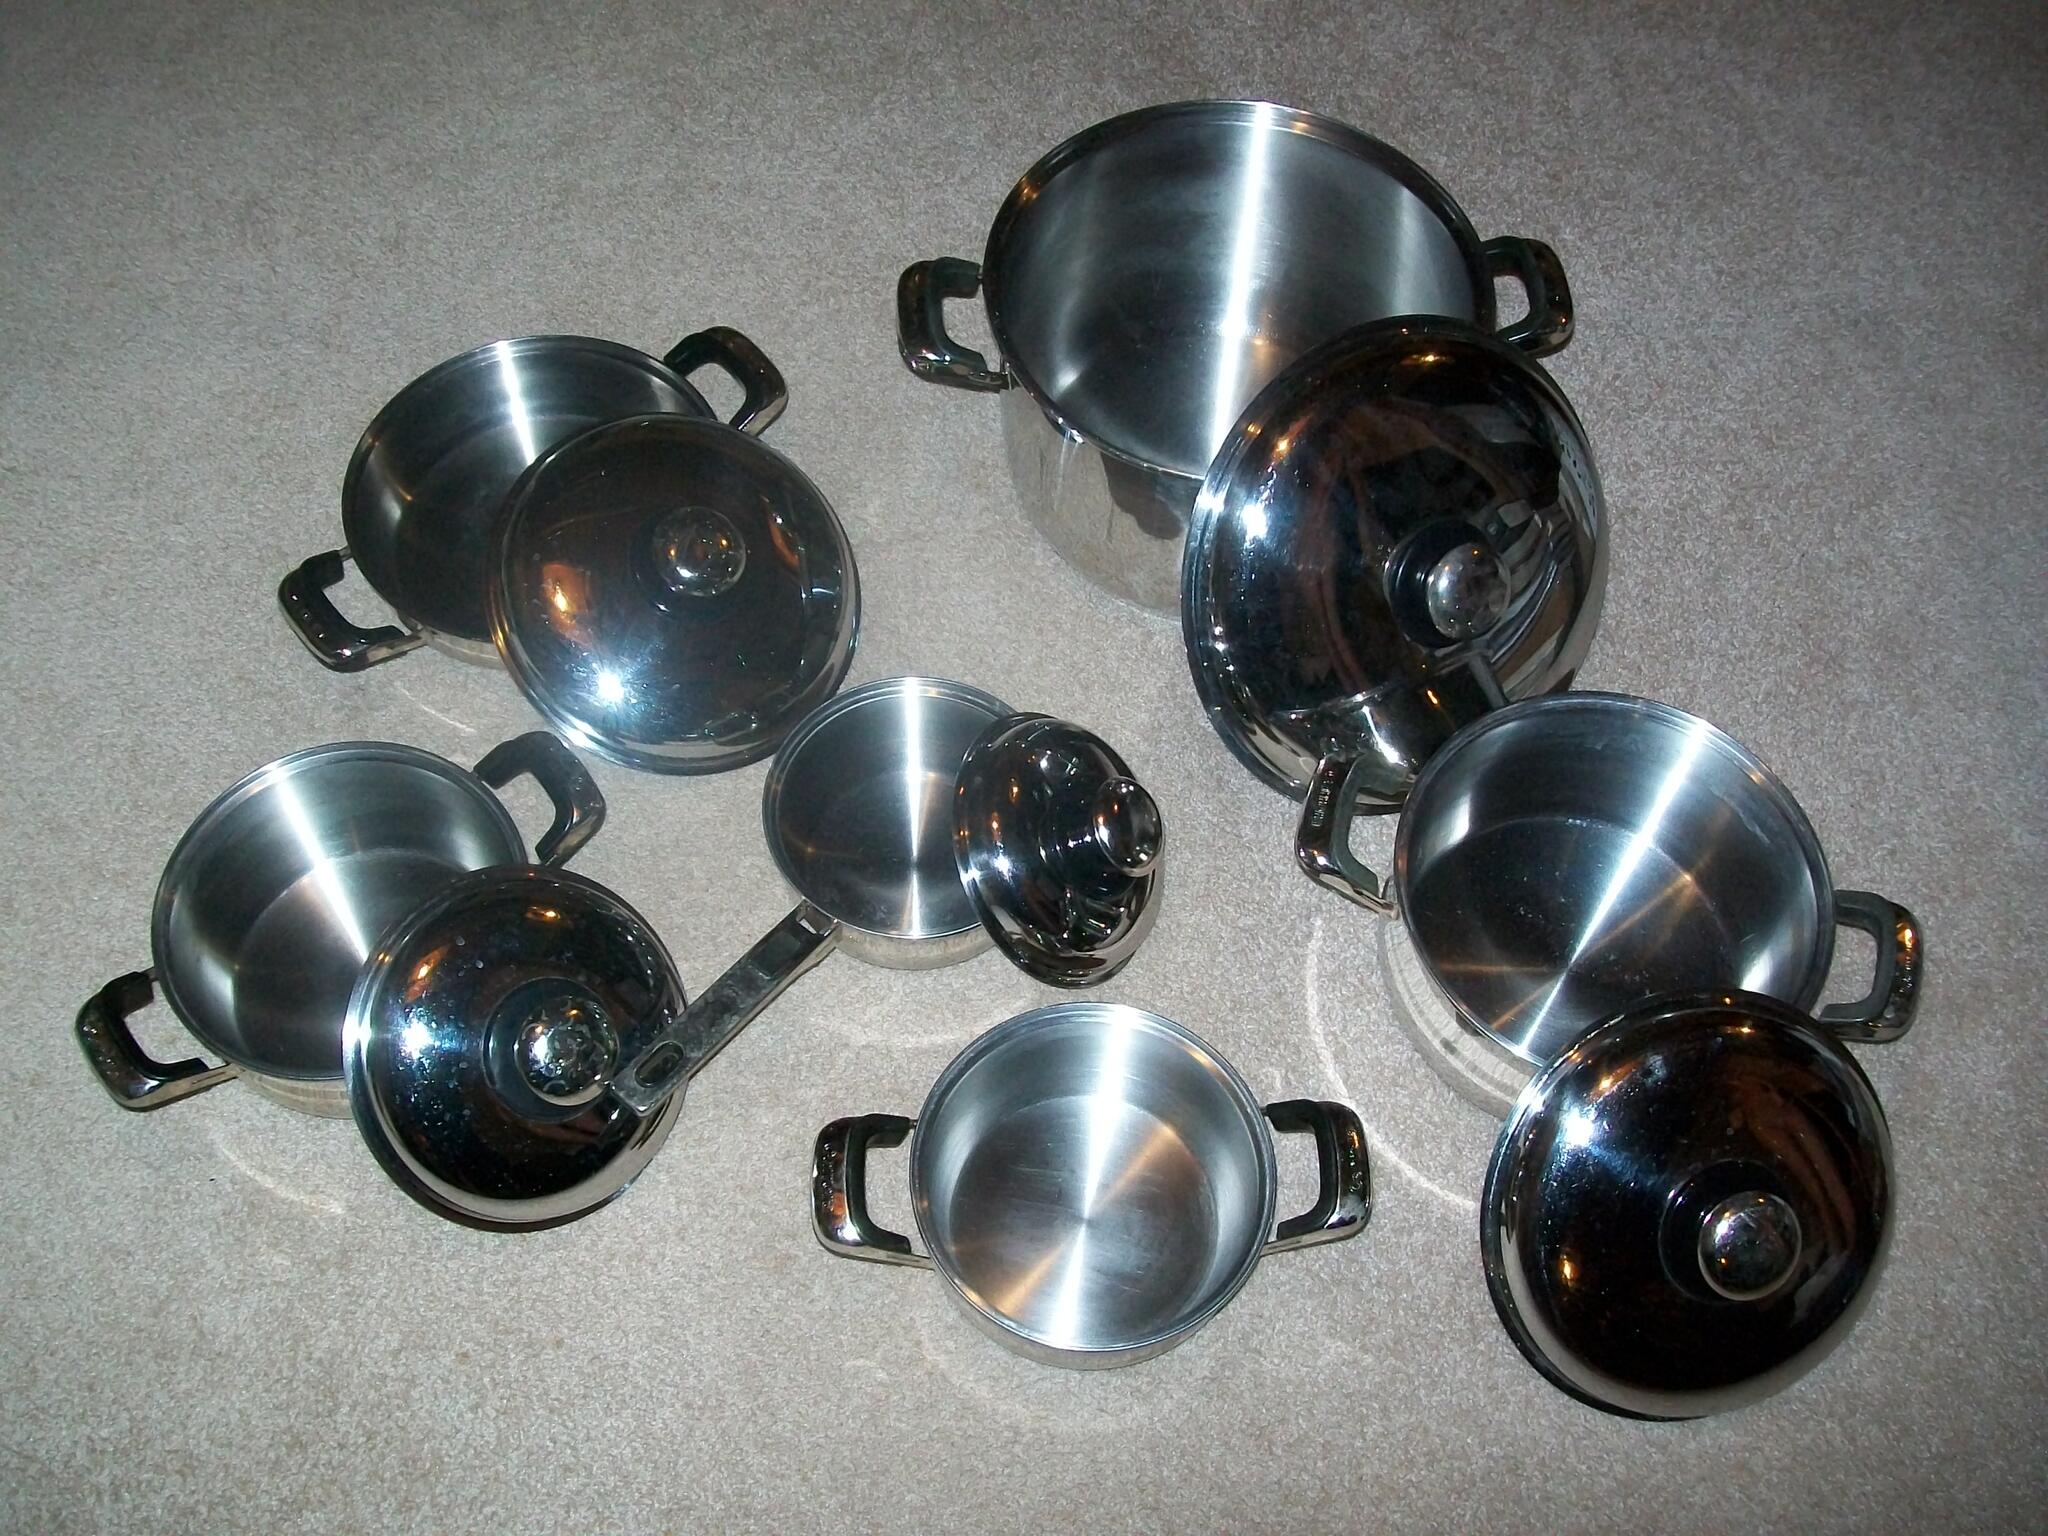 CARRERA Surgical 18/10 Stainless Steel Pots & Pans 11 Piece Set Pre-owned  For $150 In Mississauga, ON | For Sale & Free — Nextdoor